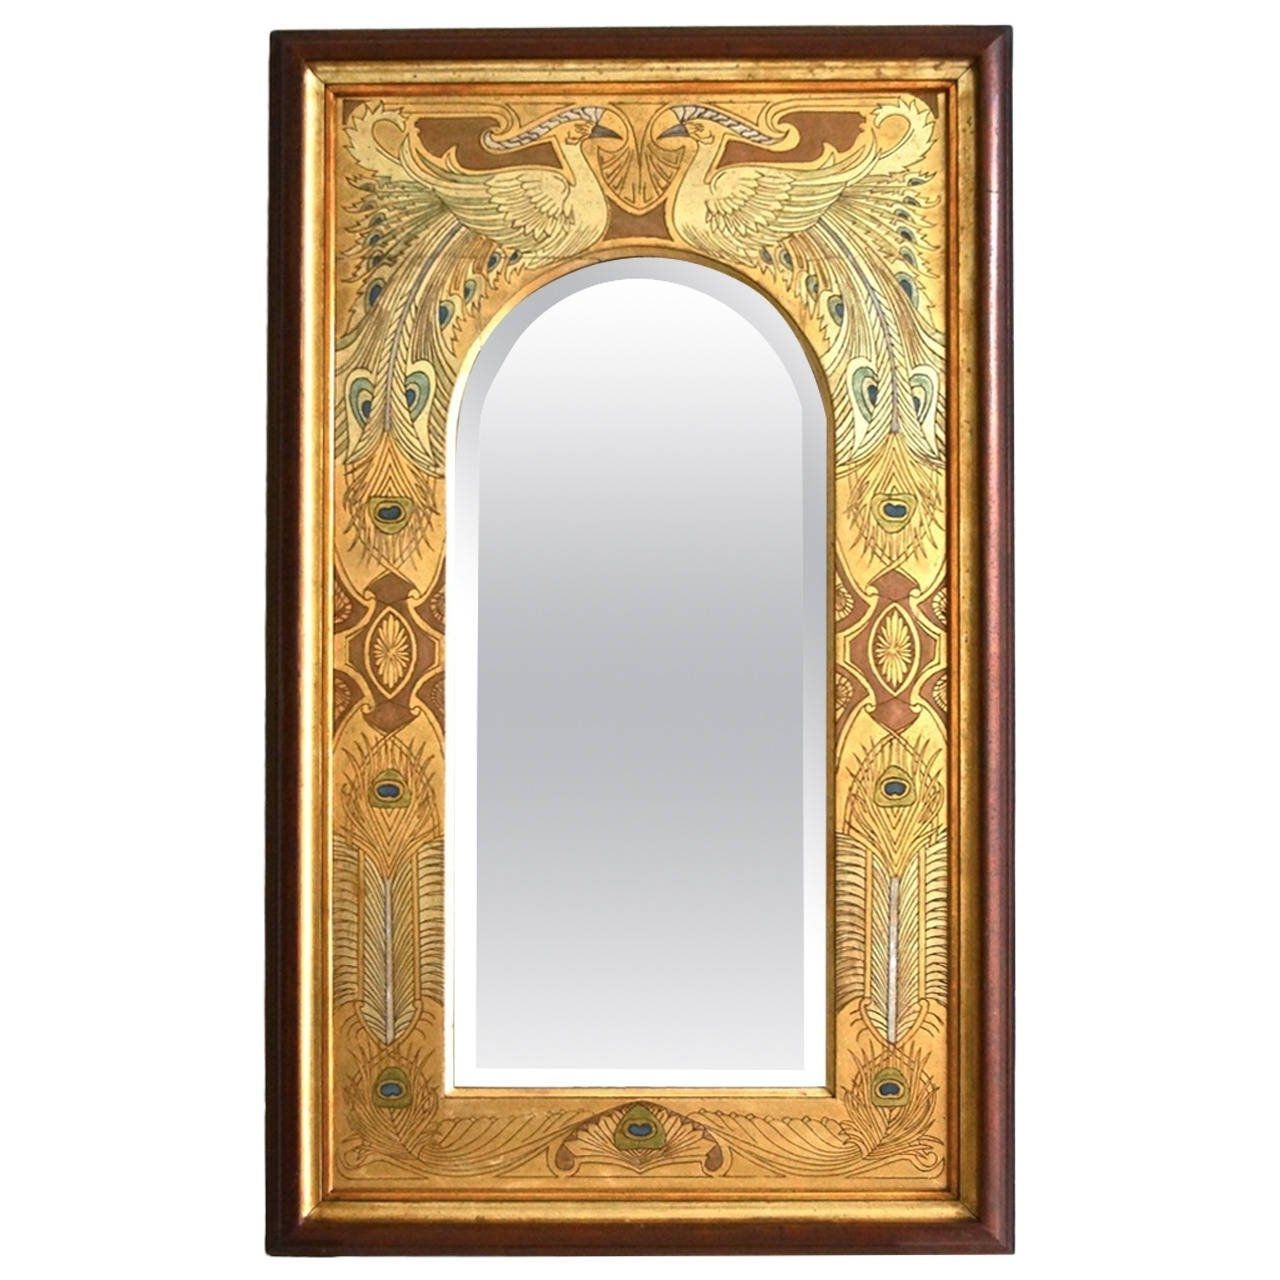 Well Known Art Nouveau Wall Decals Regarding Art Nouveau Wall Mirrors For Sale – Large Art Deco Wall Mirrors Uk (View 12 of 15)